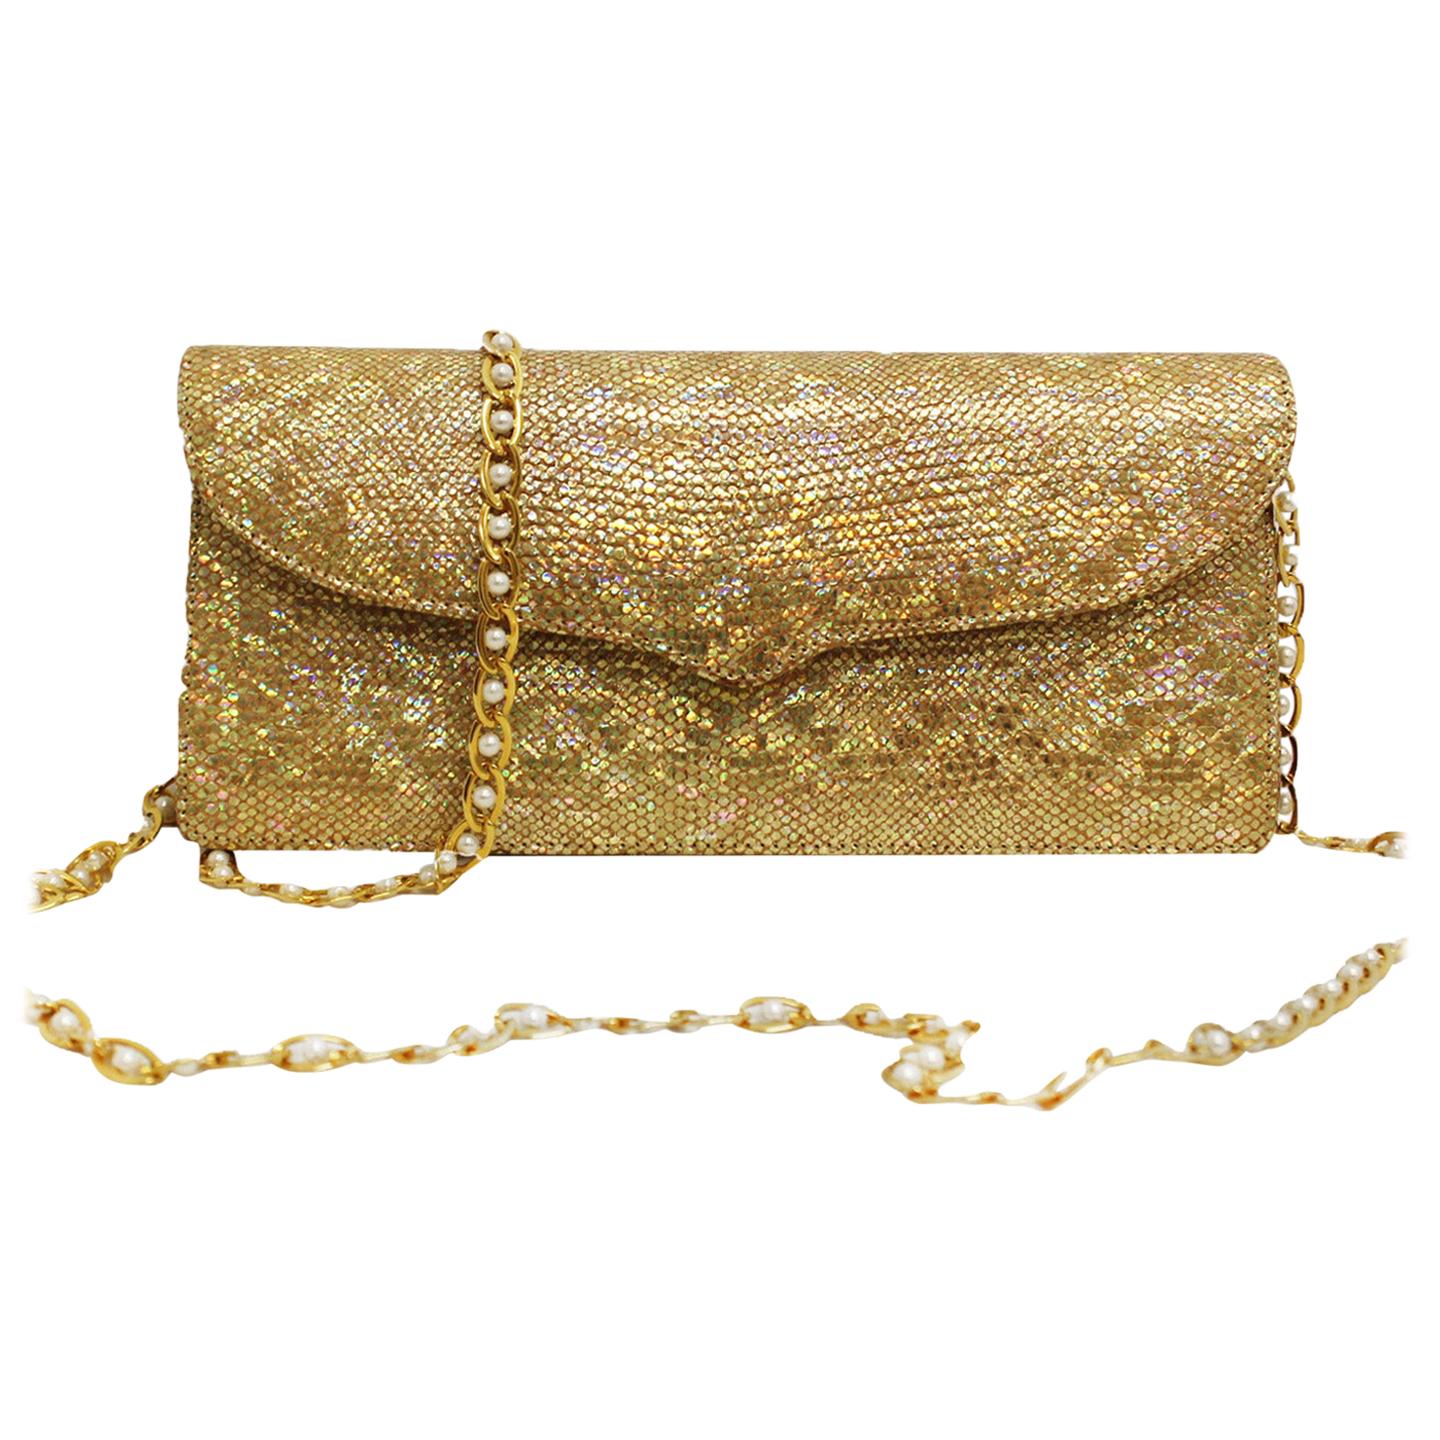 Luscious Lana Marks Gold Glitter Clutch with Gold Tone and Faux Pearl ...